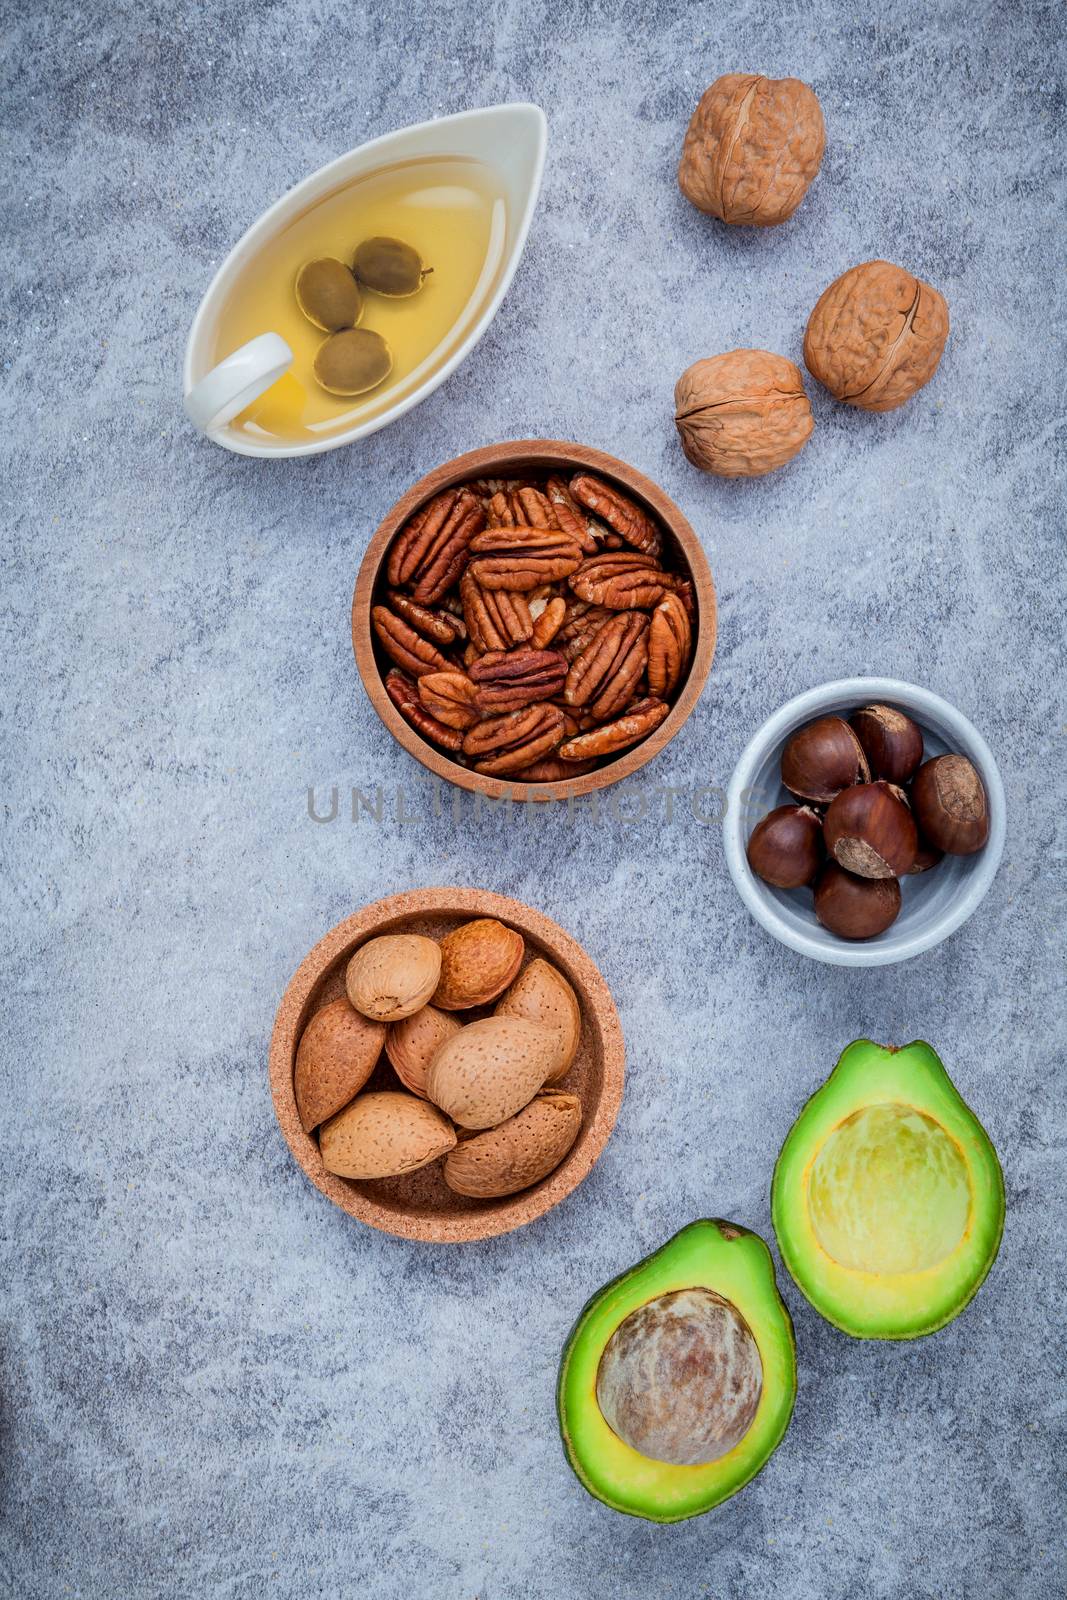 Selection food sources of omega 3 and unsaturated fats. super food high omega 3 and unsaturated fats for healthy food. Almond ,pecan ,hazelnuts,walnuts ,olive oil and avocado.